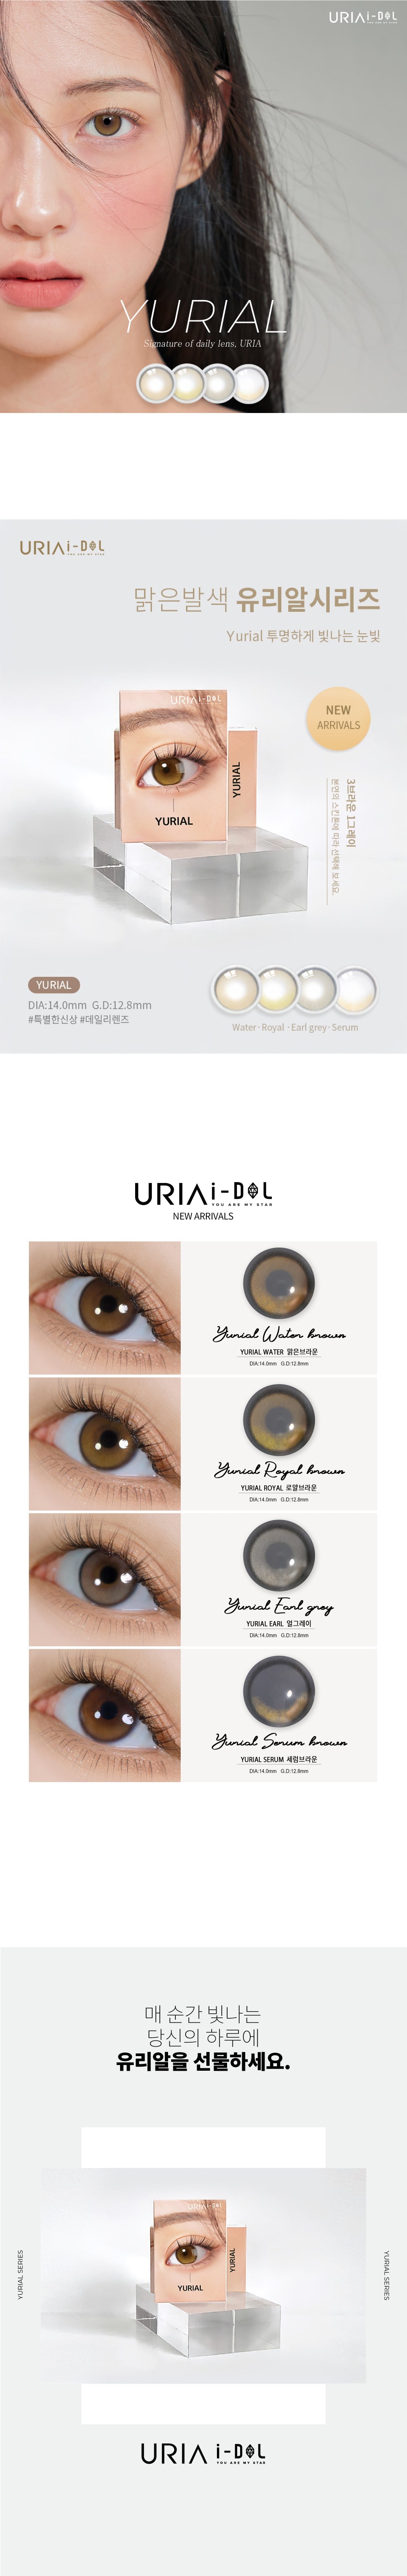 [Ready] I-Dol Lens Yurial Royal Brown | 6 Months